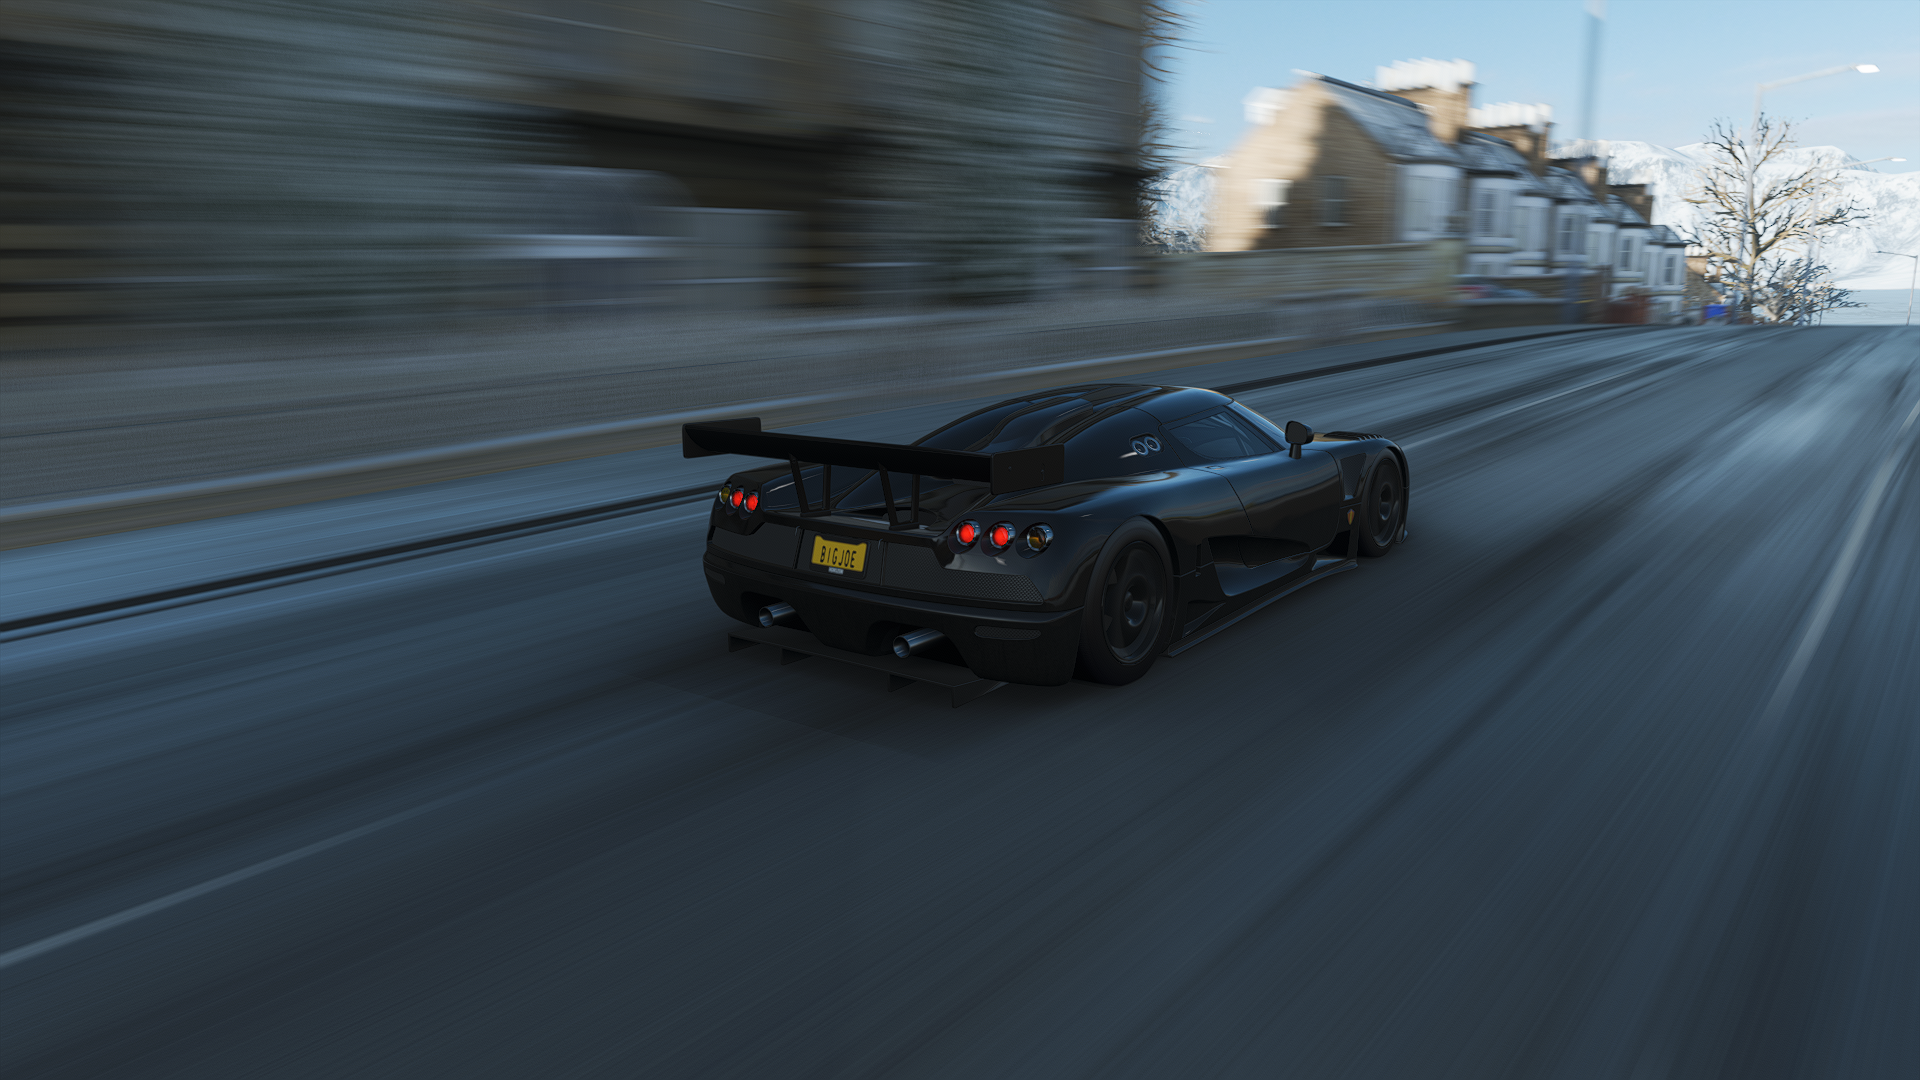 General 1920x1080 Forza Forza Horizon Forza Horizon 4 racing car CGI Koenigsegg CCGT video games road blurred blurry background rear view taillights licence plates PlaygroundGames Swedish cars Hypercar